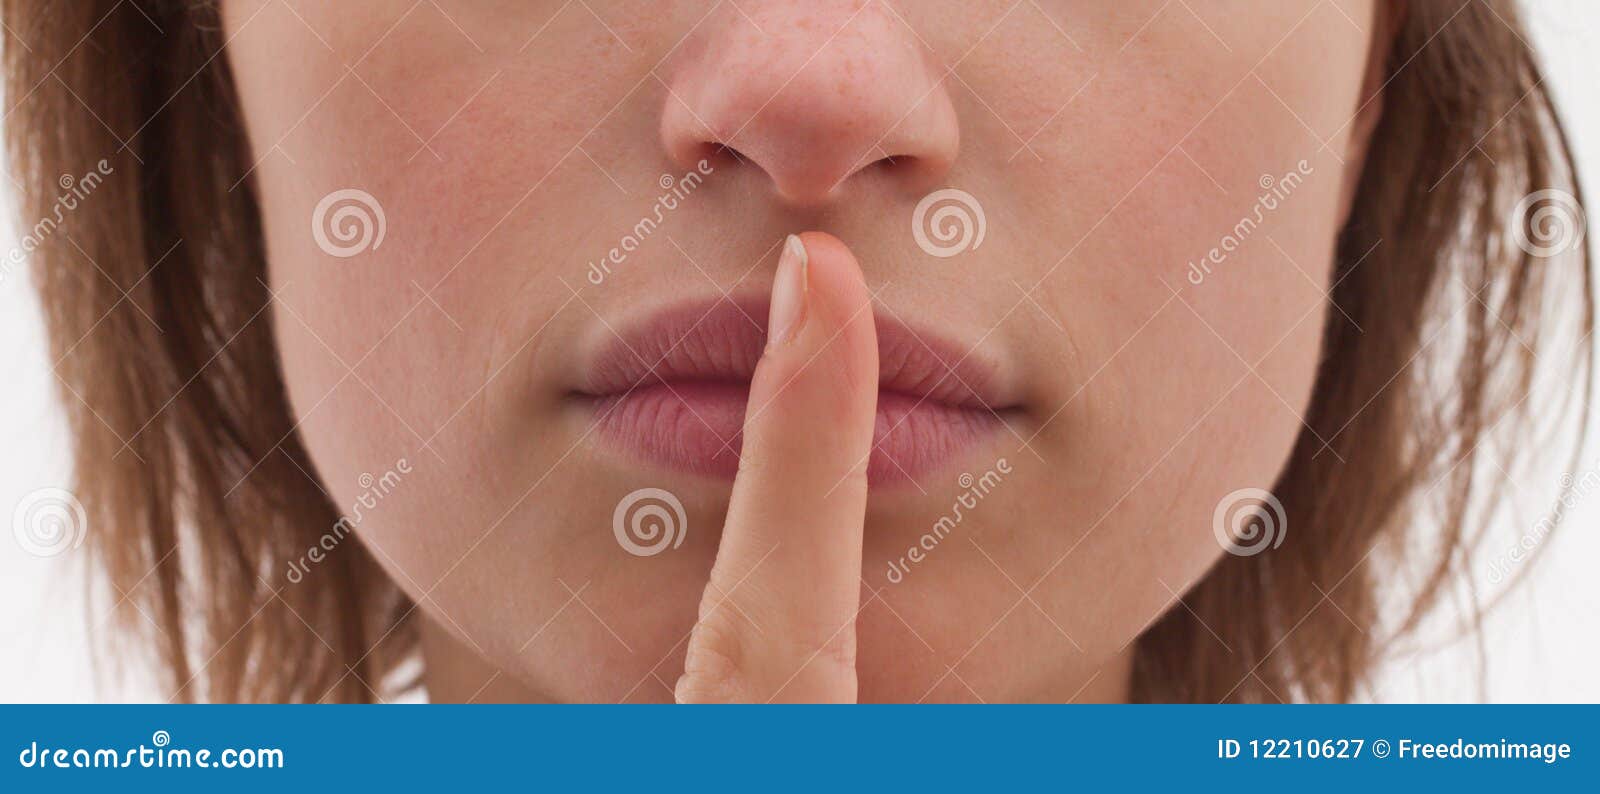 shh - cut out of woman with finger to lips